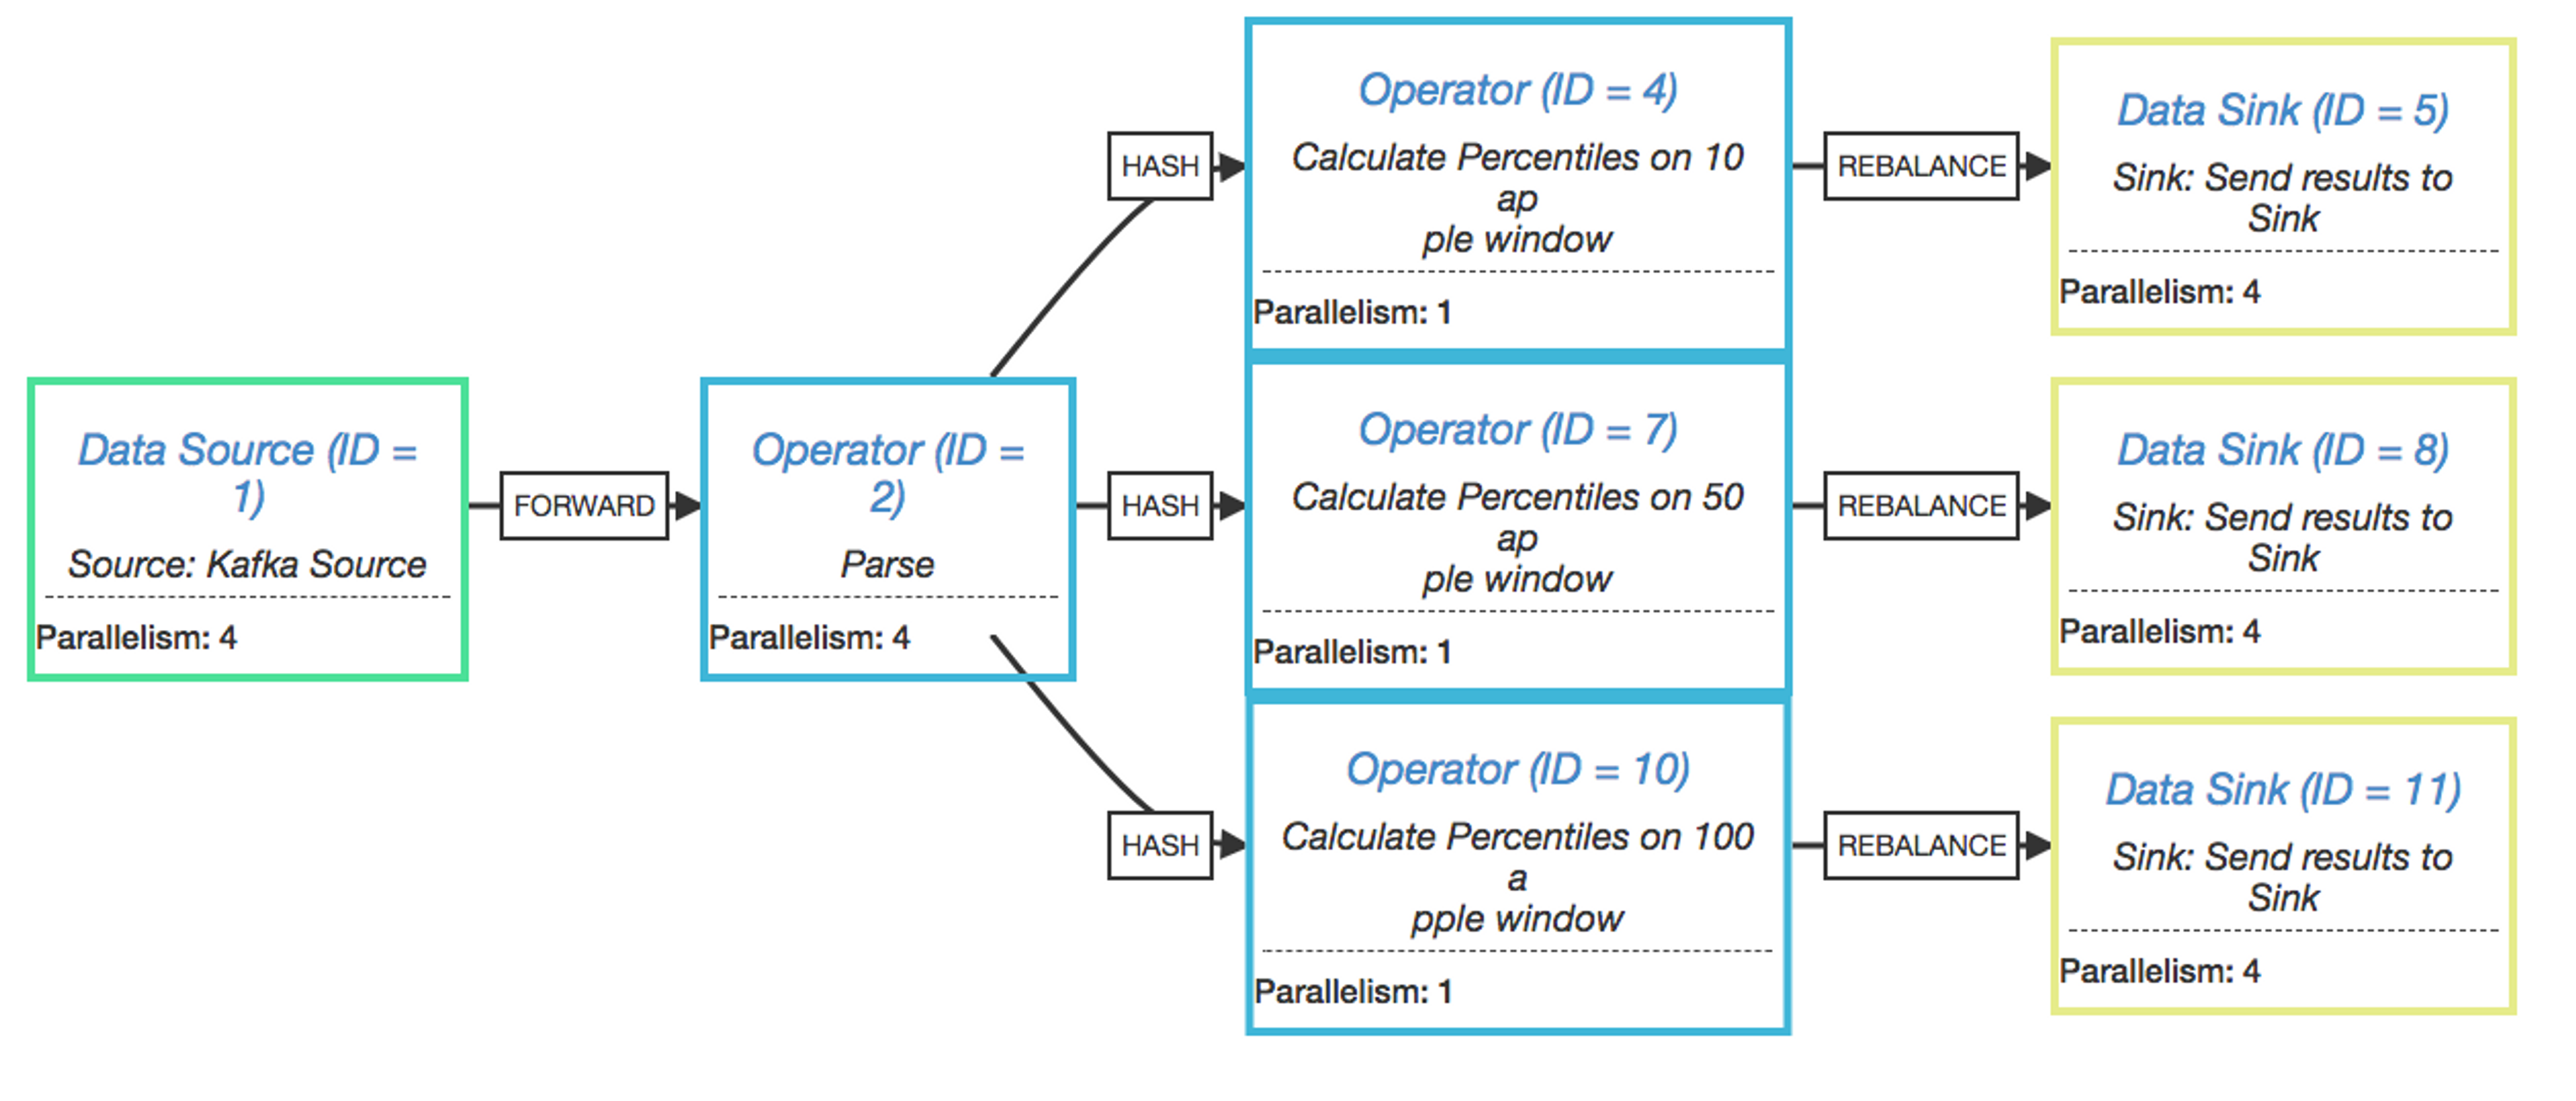 An image showing the execution plan for the parallel percentile calculations